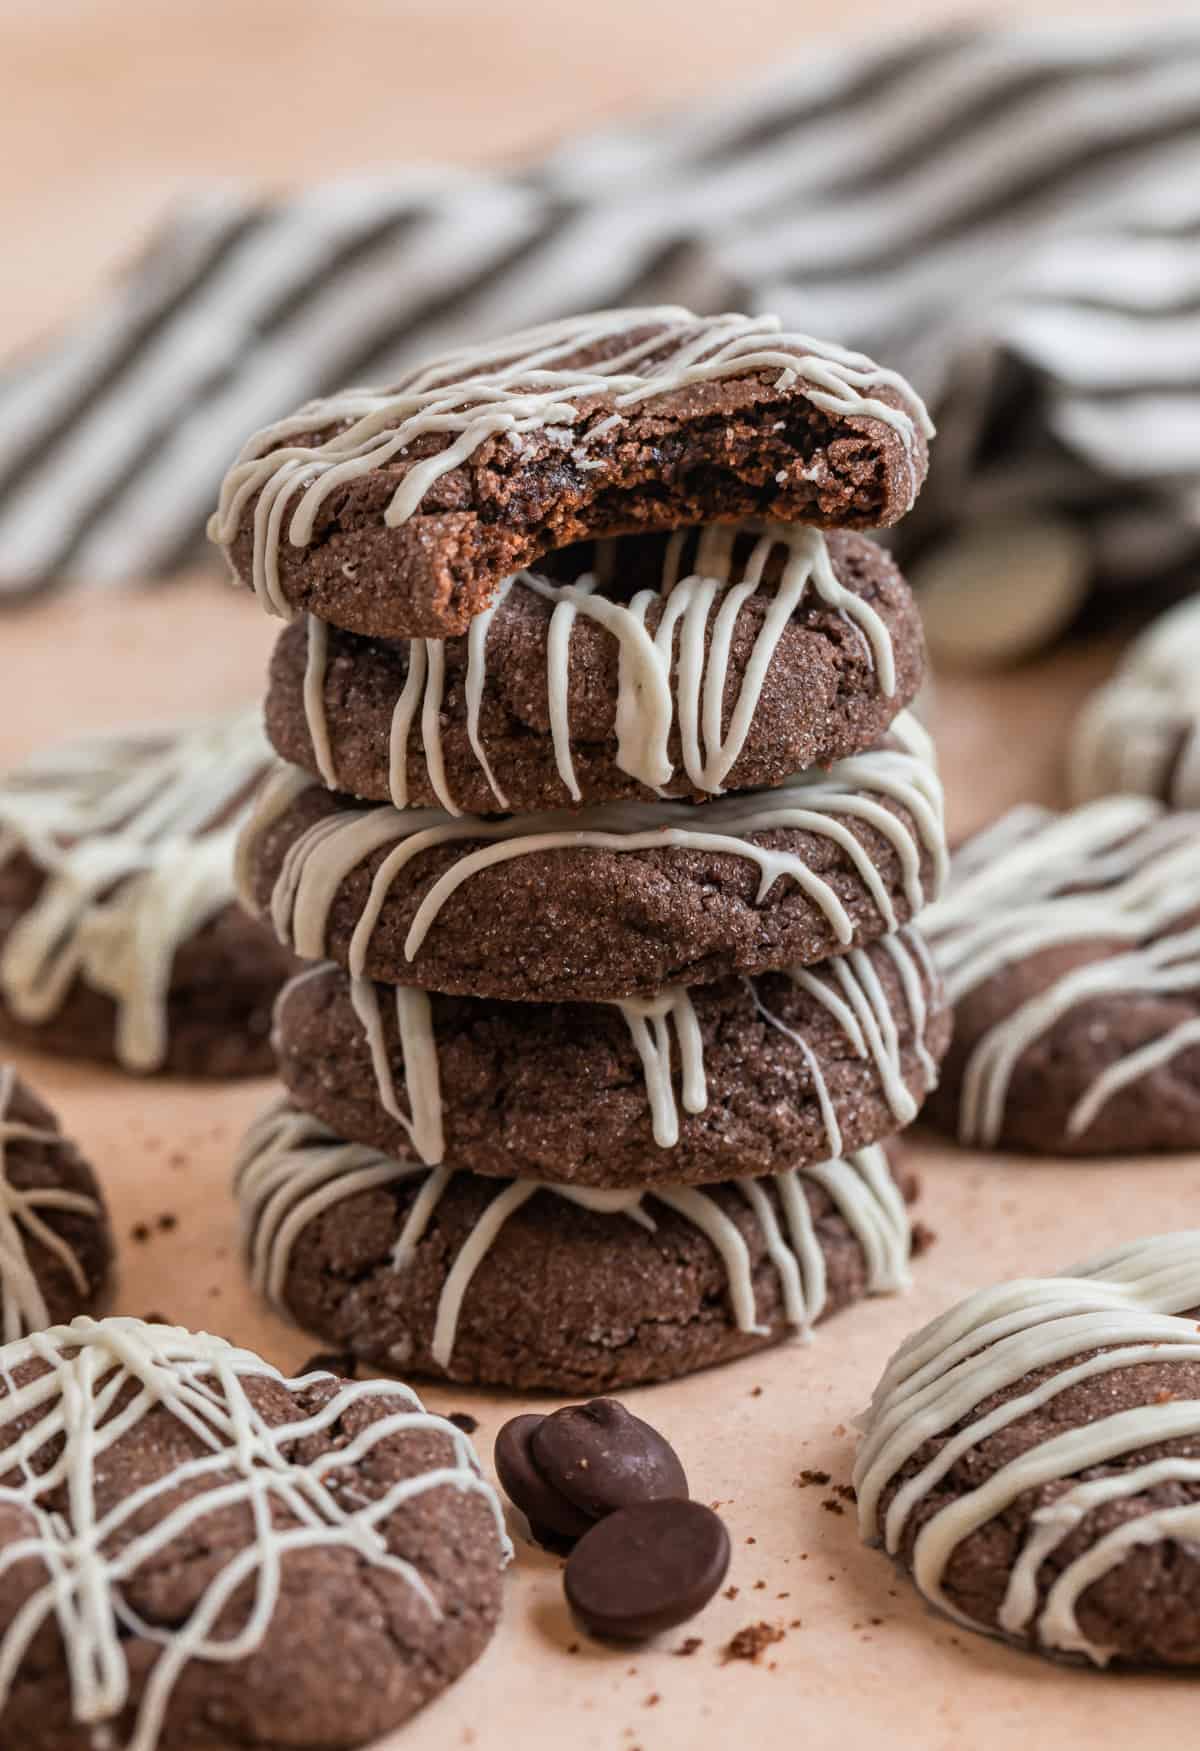 Stack of chocolate cake mix cookies with other cookies and chocolate chips surrounding.